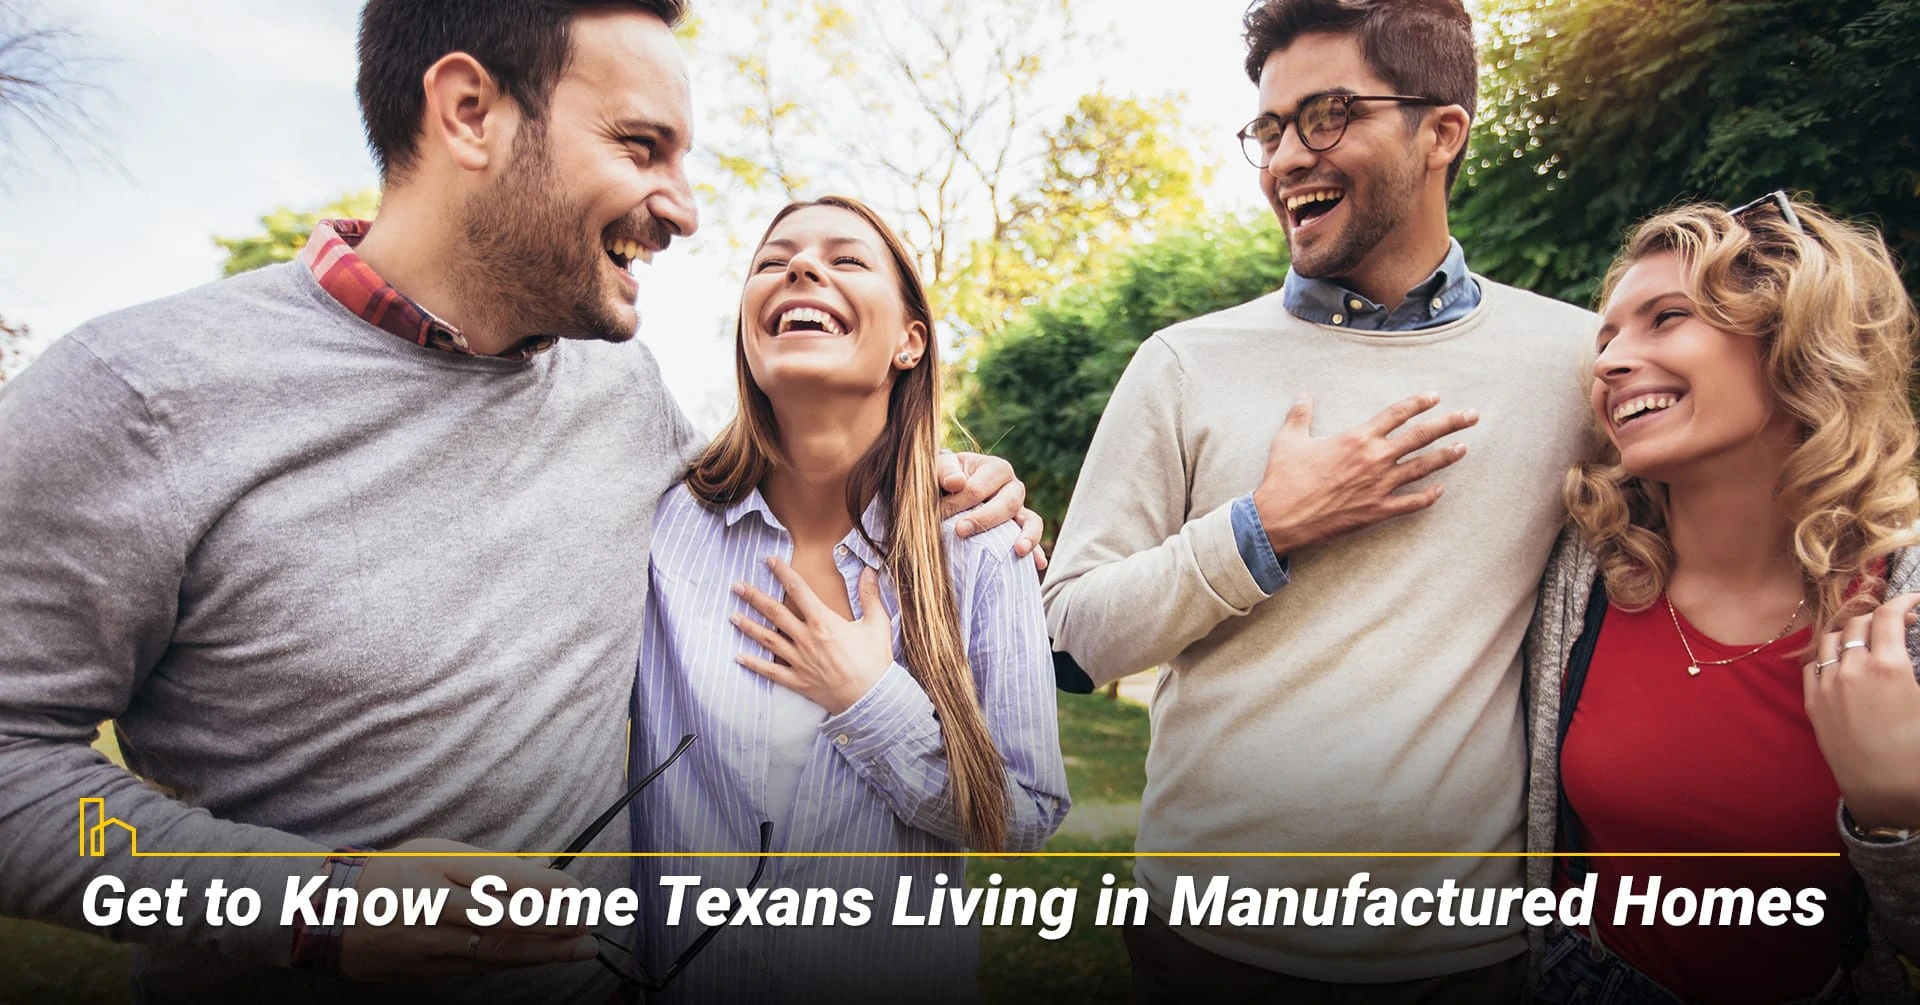 Get to Know Some Texans Living in Manufactured Homes, talk to current owners